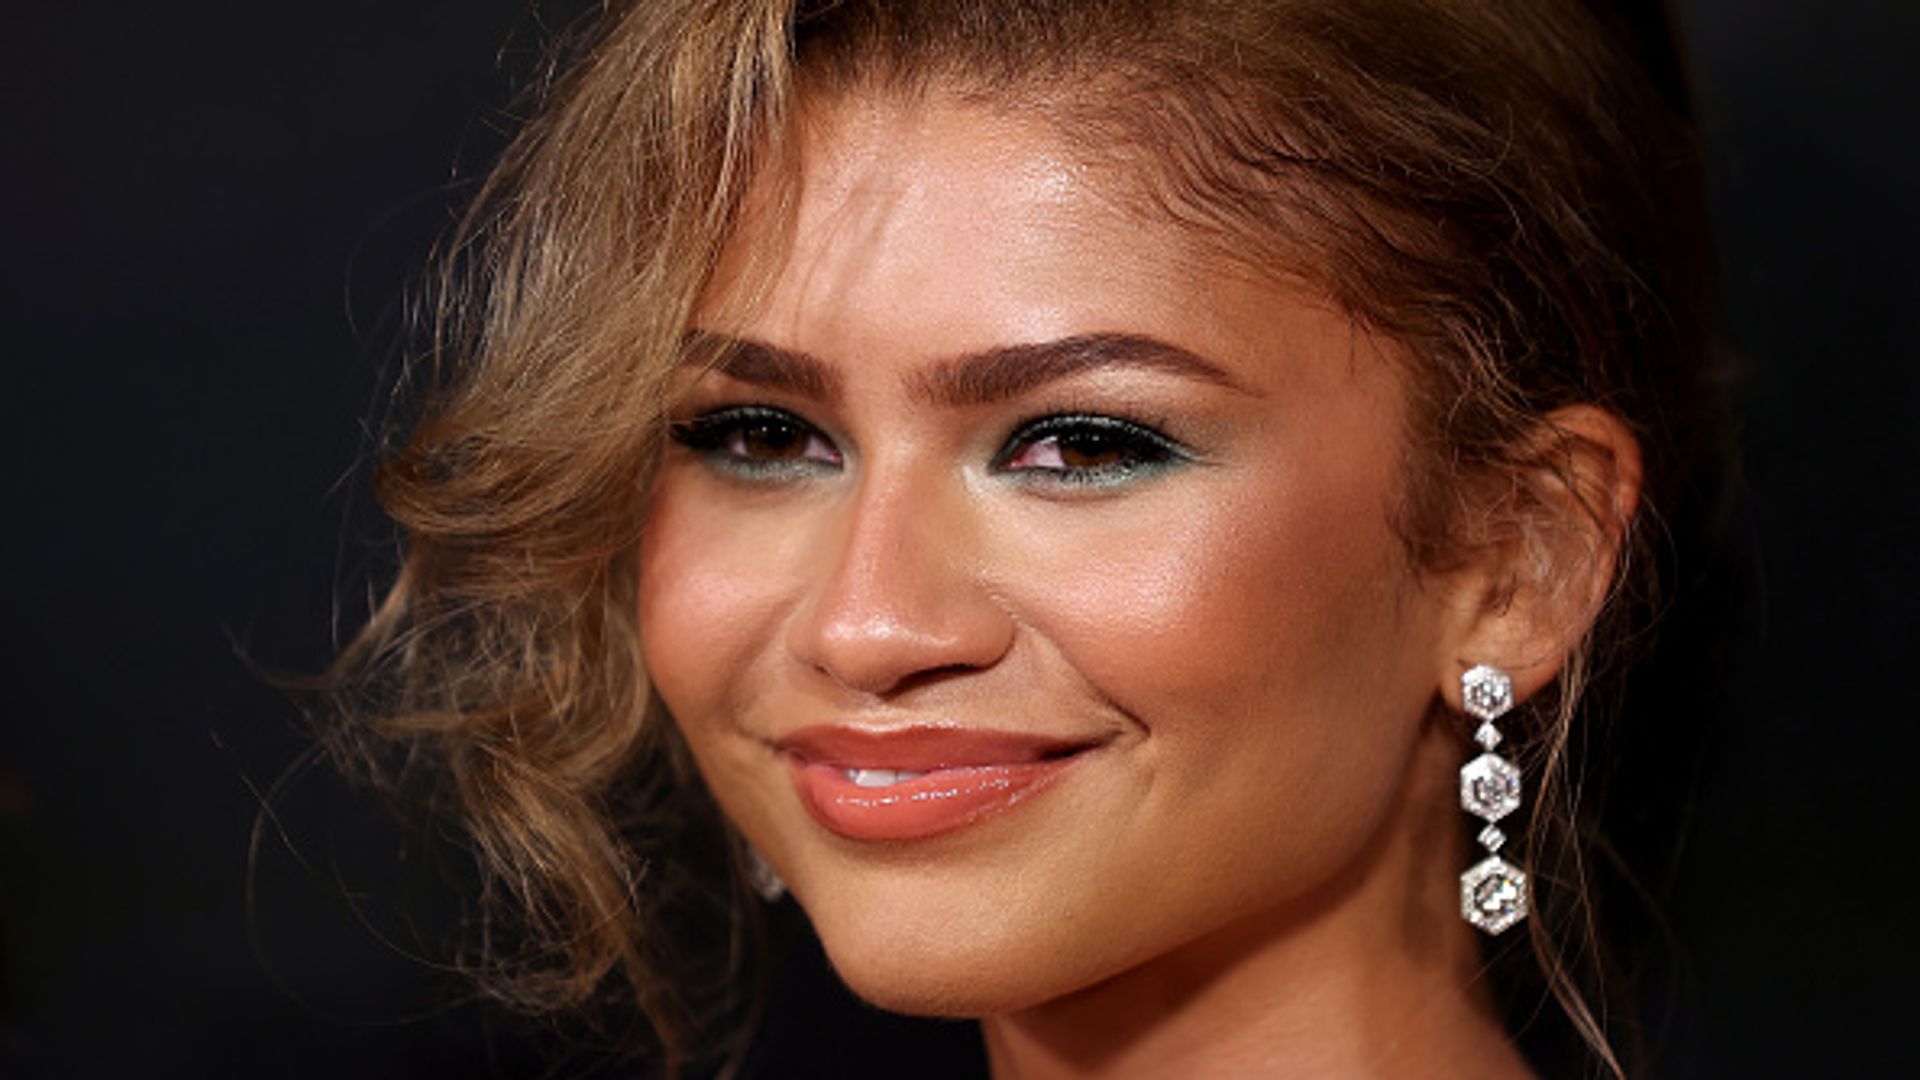 Zendaya attends the Australian premiere of "Challengers" at the State Theatre on March 26, 2024 in Sydney, Australia